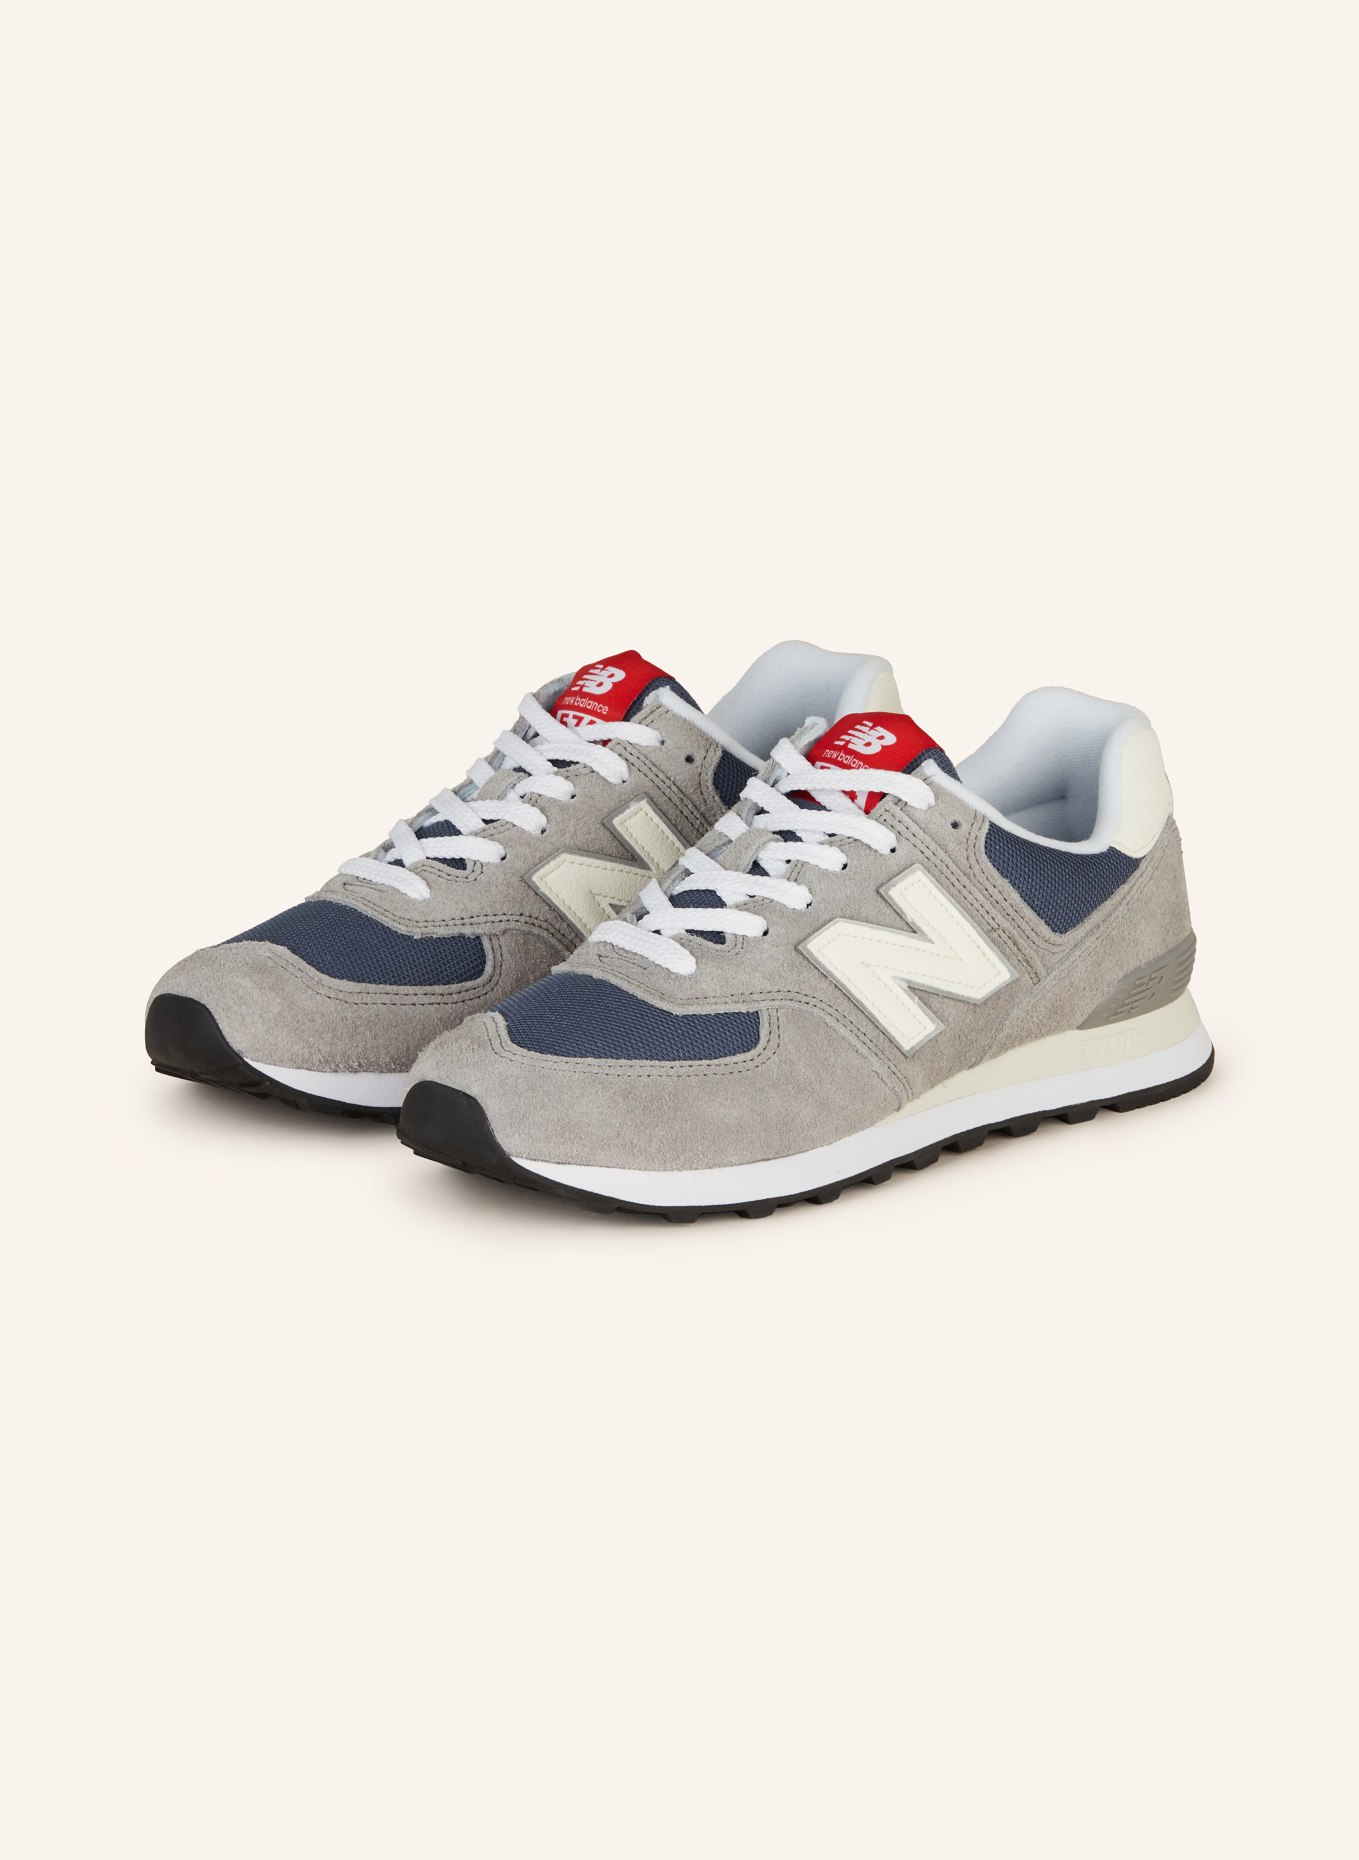 New Balance 574 sneakers in gray